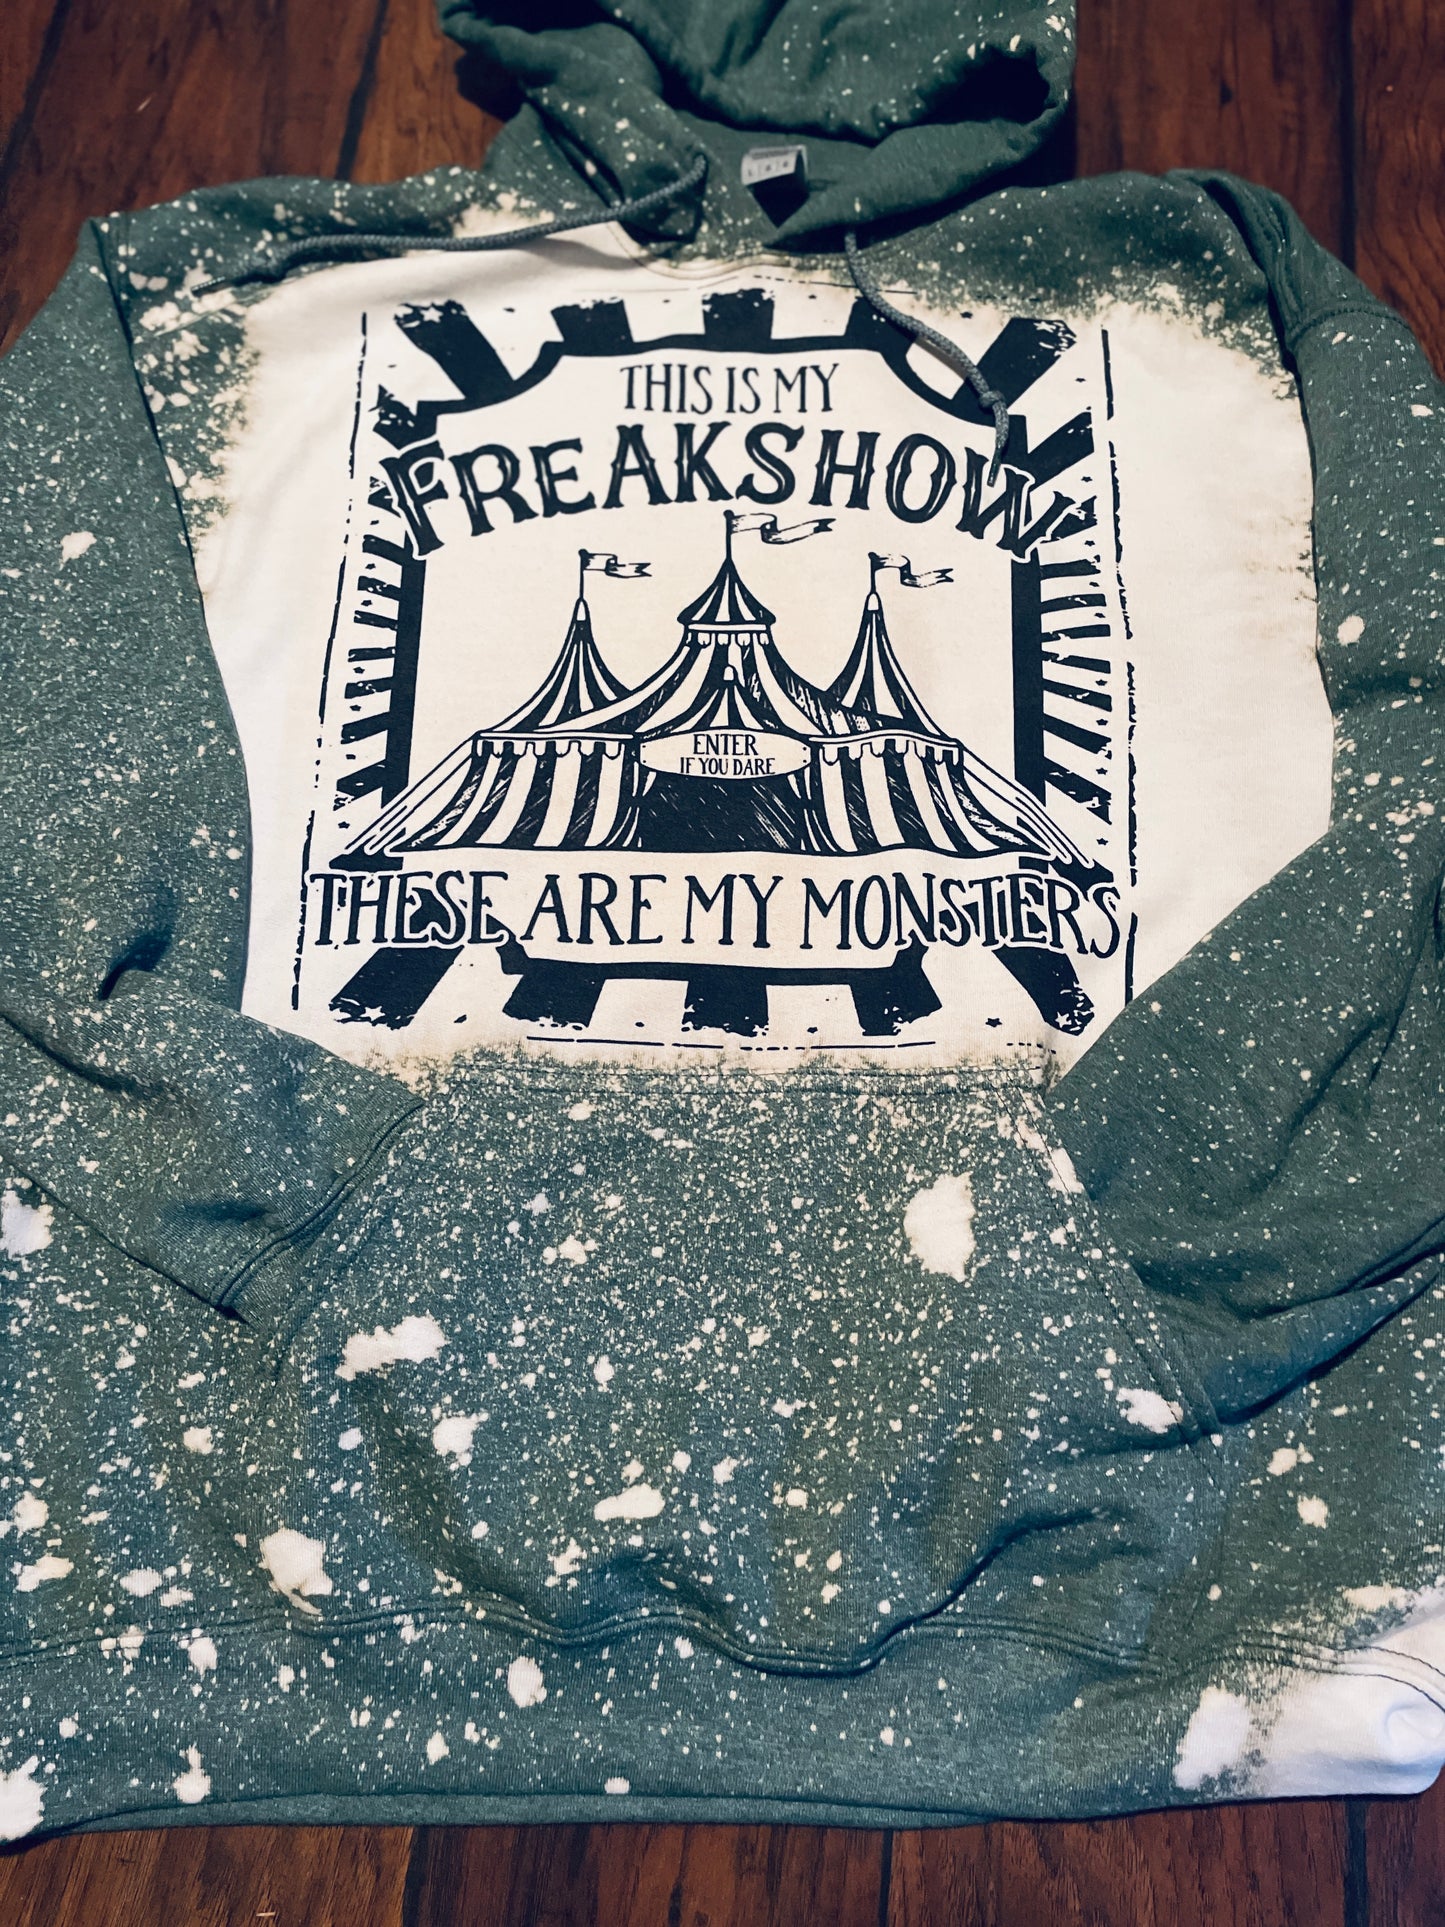 This is my Freakshow, these are my Monsters!